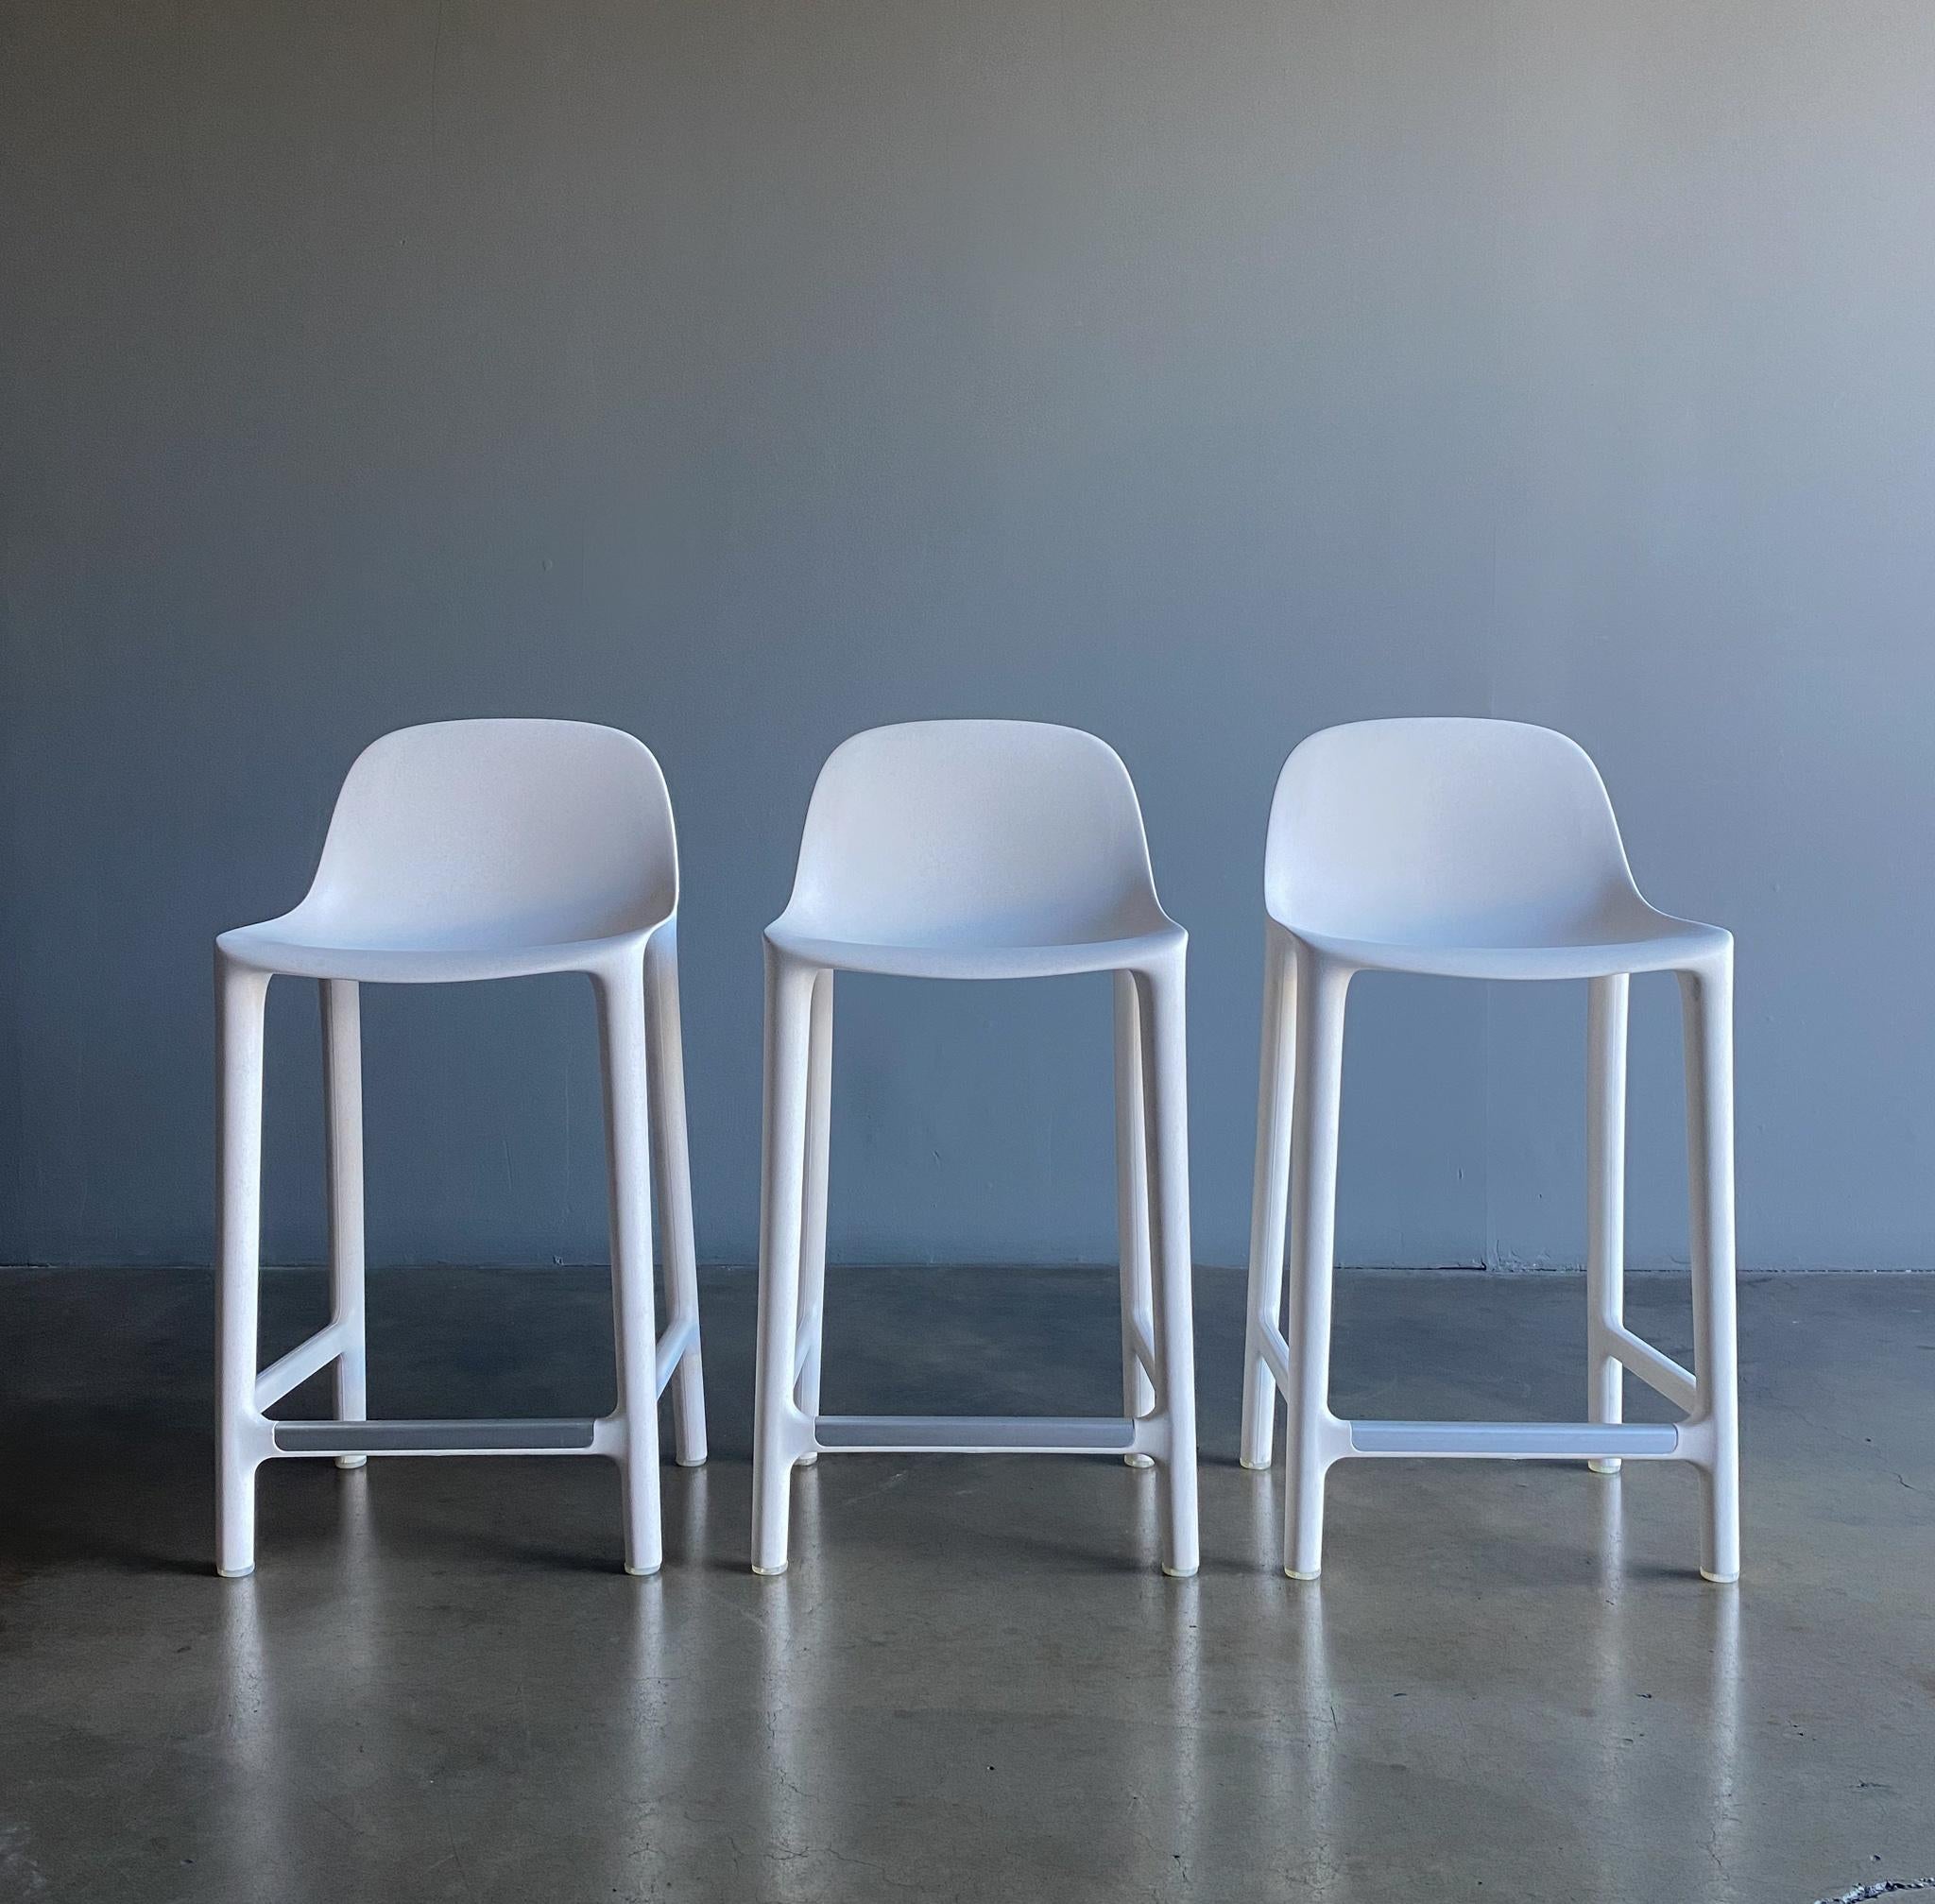 Philippe starck broom barstools in white for Emeco (a set of three). These stools are made from 75% waste polypropylene and 15% reclaimed wood.